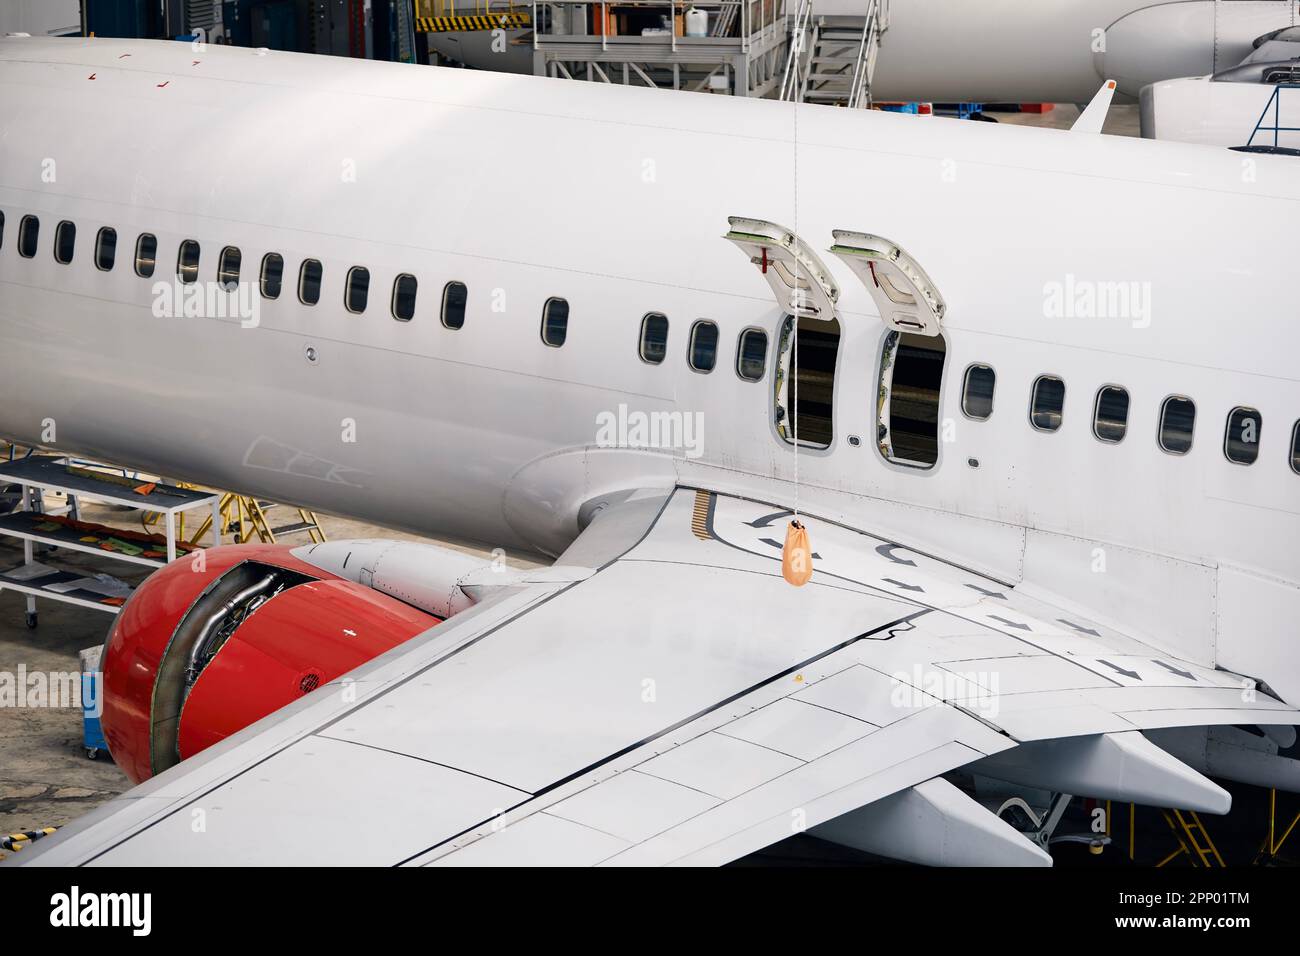 Commercial airplane under heavy maintenance. Side view of plane fuselage with emergency exits and wing. Stock Photo